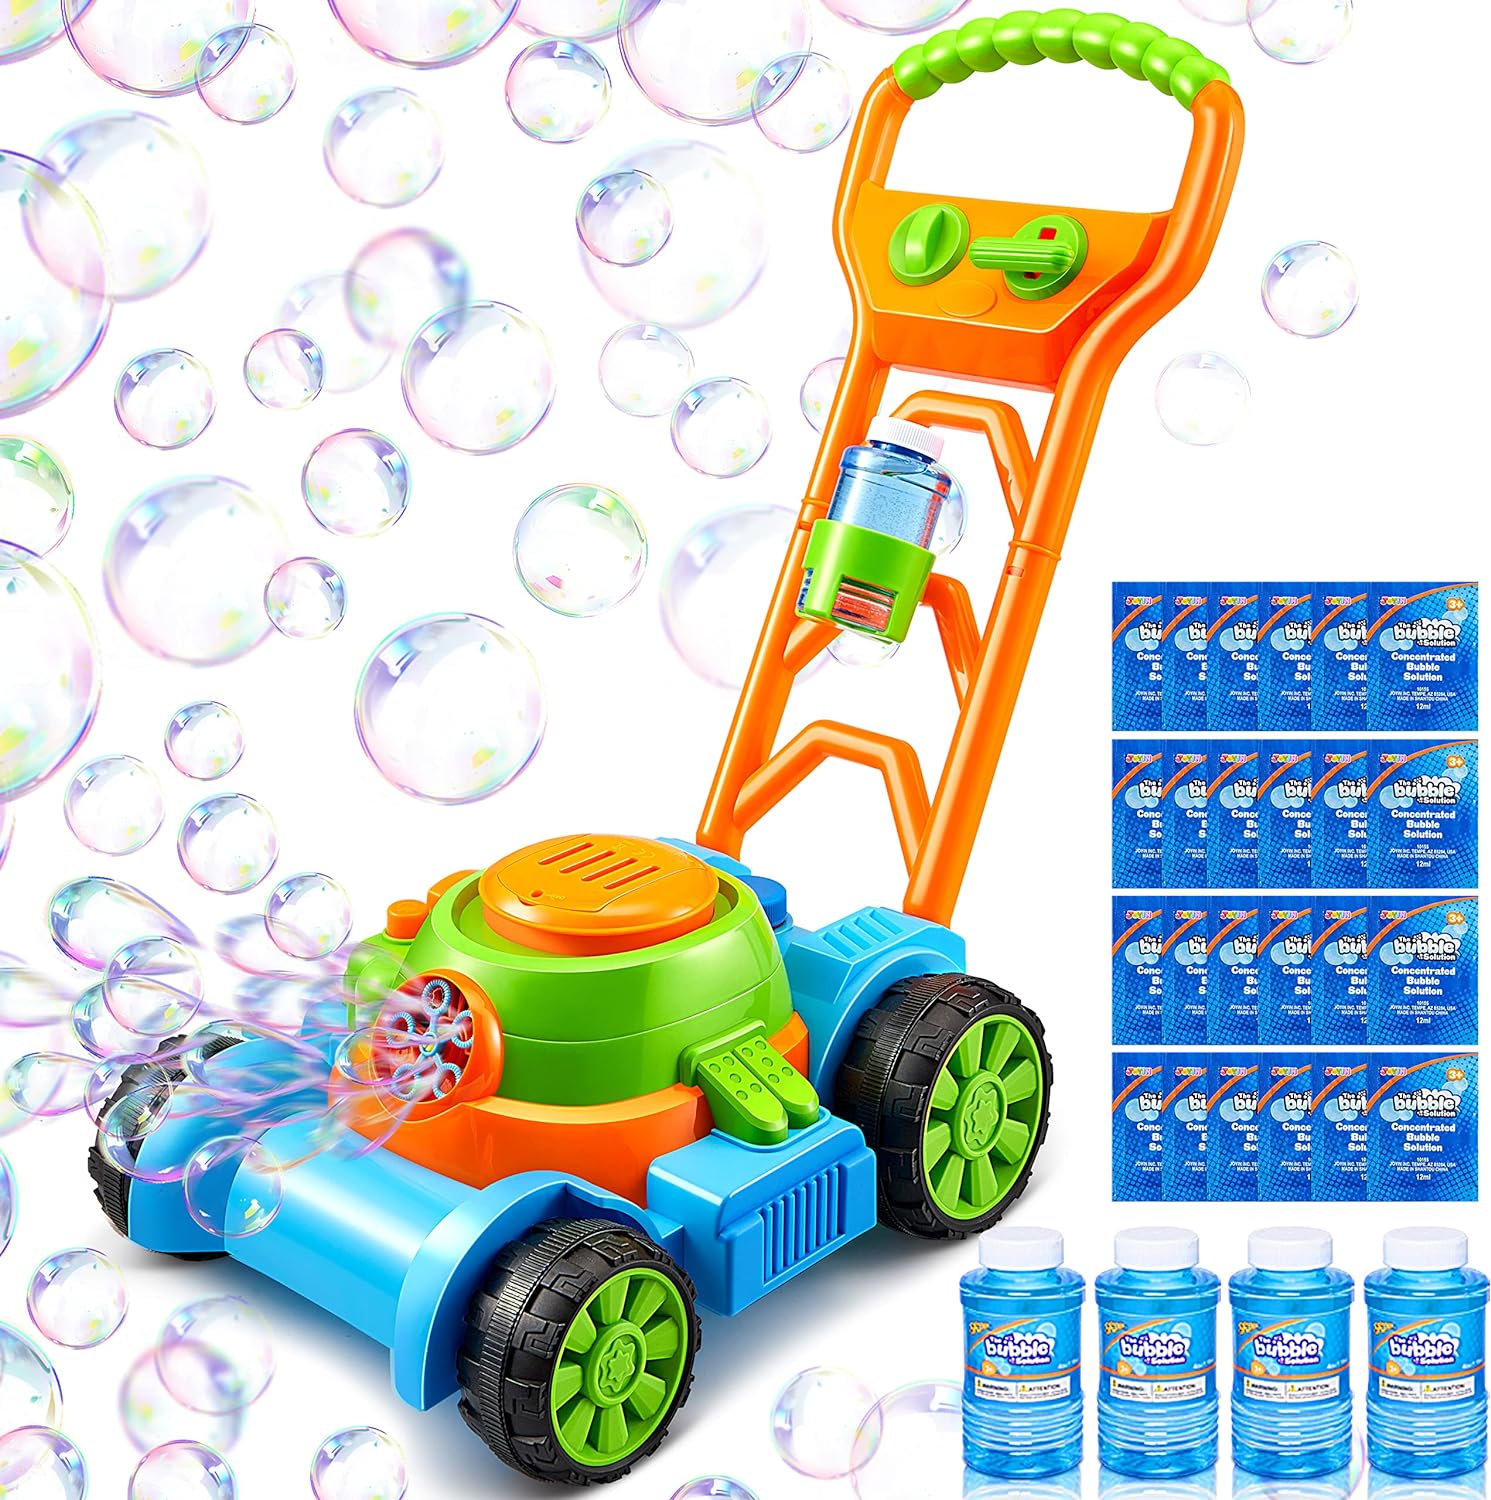 Act Fast! Sloosh Bubble Lawn Mower Toddler Toys - Kids Toys Bubble Machine Summer Outdoor Toys Games